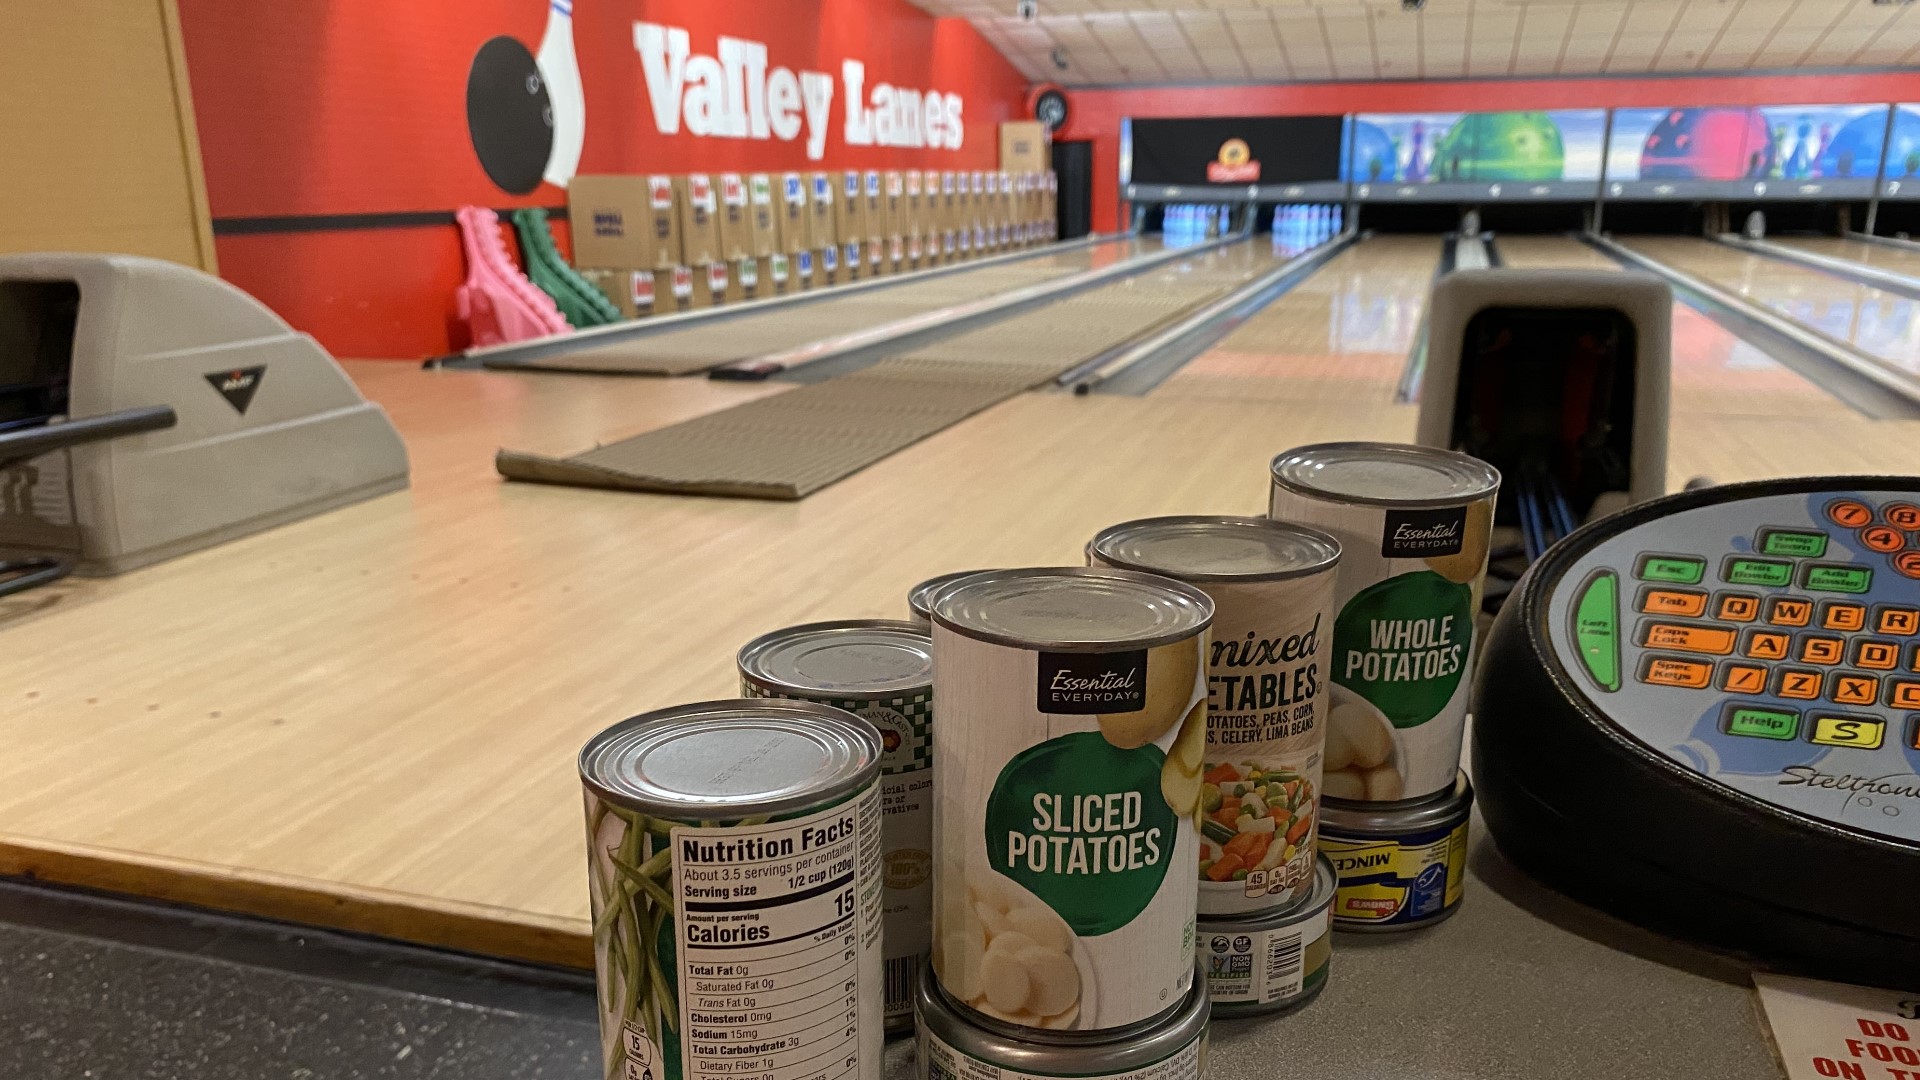 Bowling isn’t the usual side dish served with turkey, but a group in Lackawanna County is showing how these two things make a good pairing for a food drive.